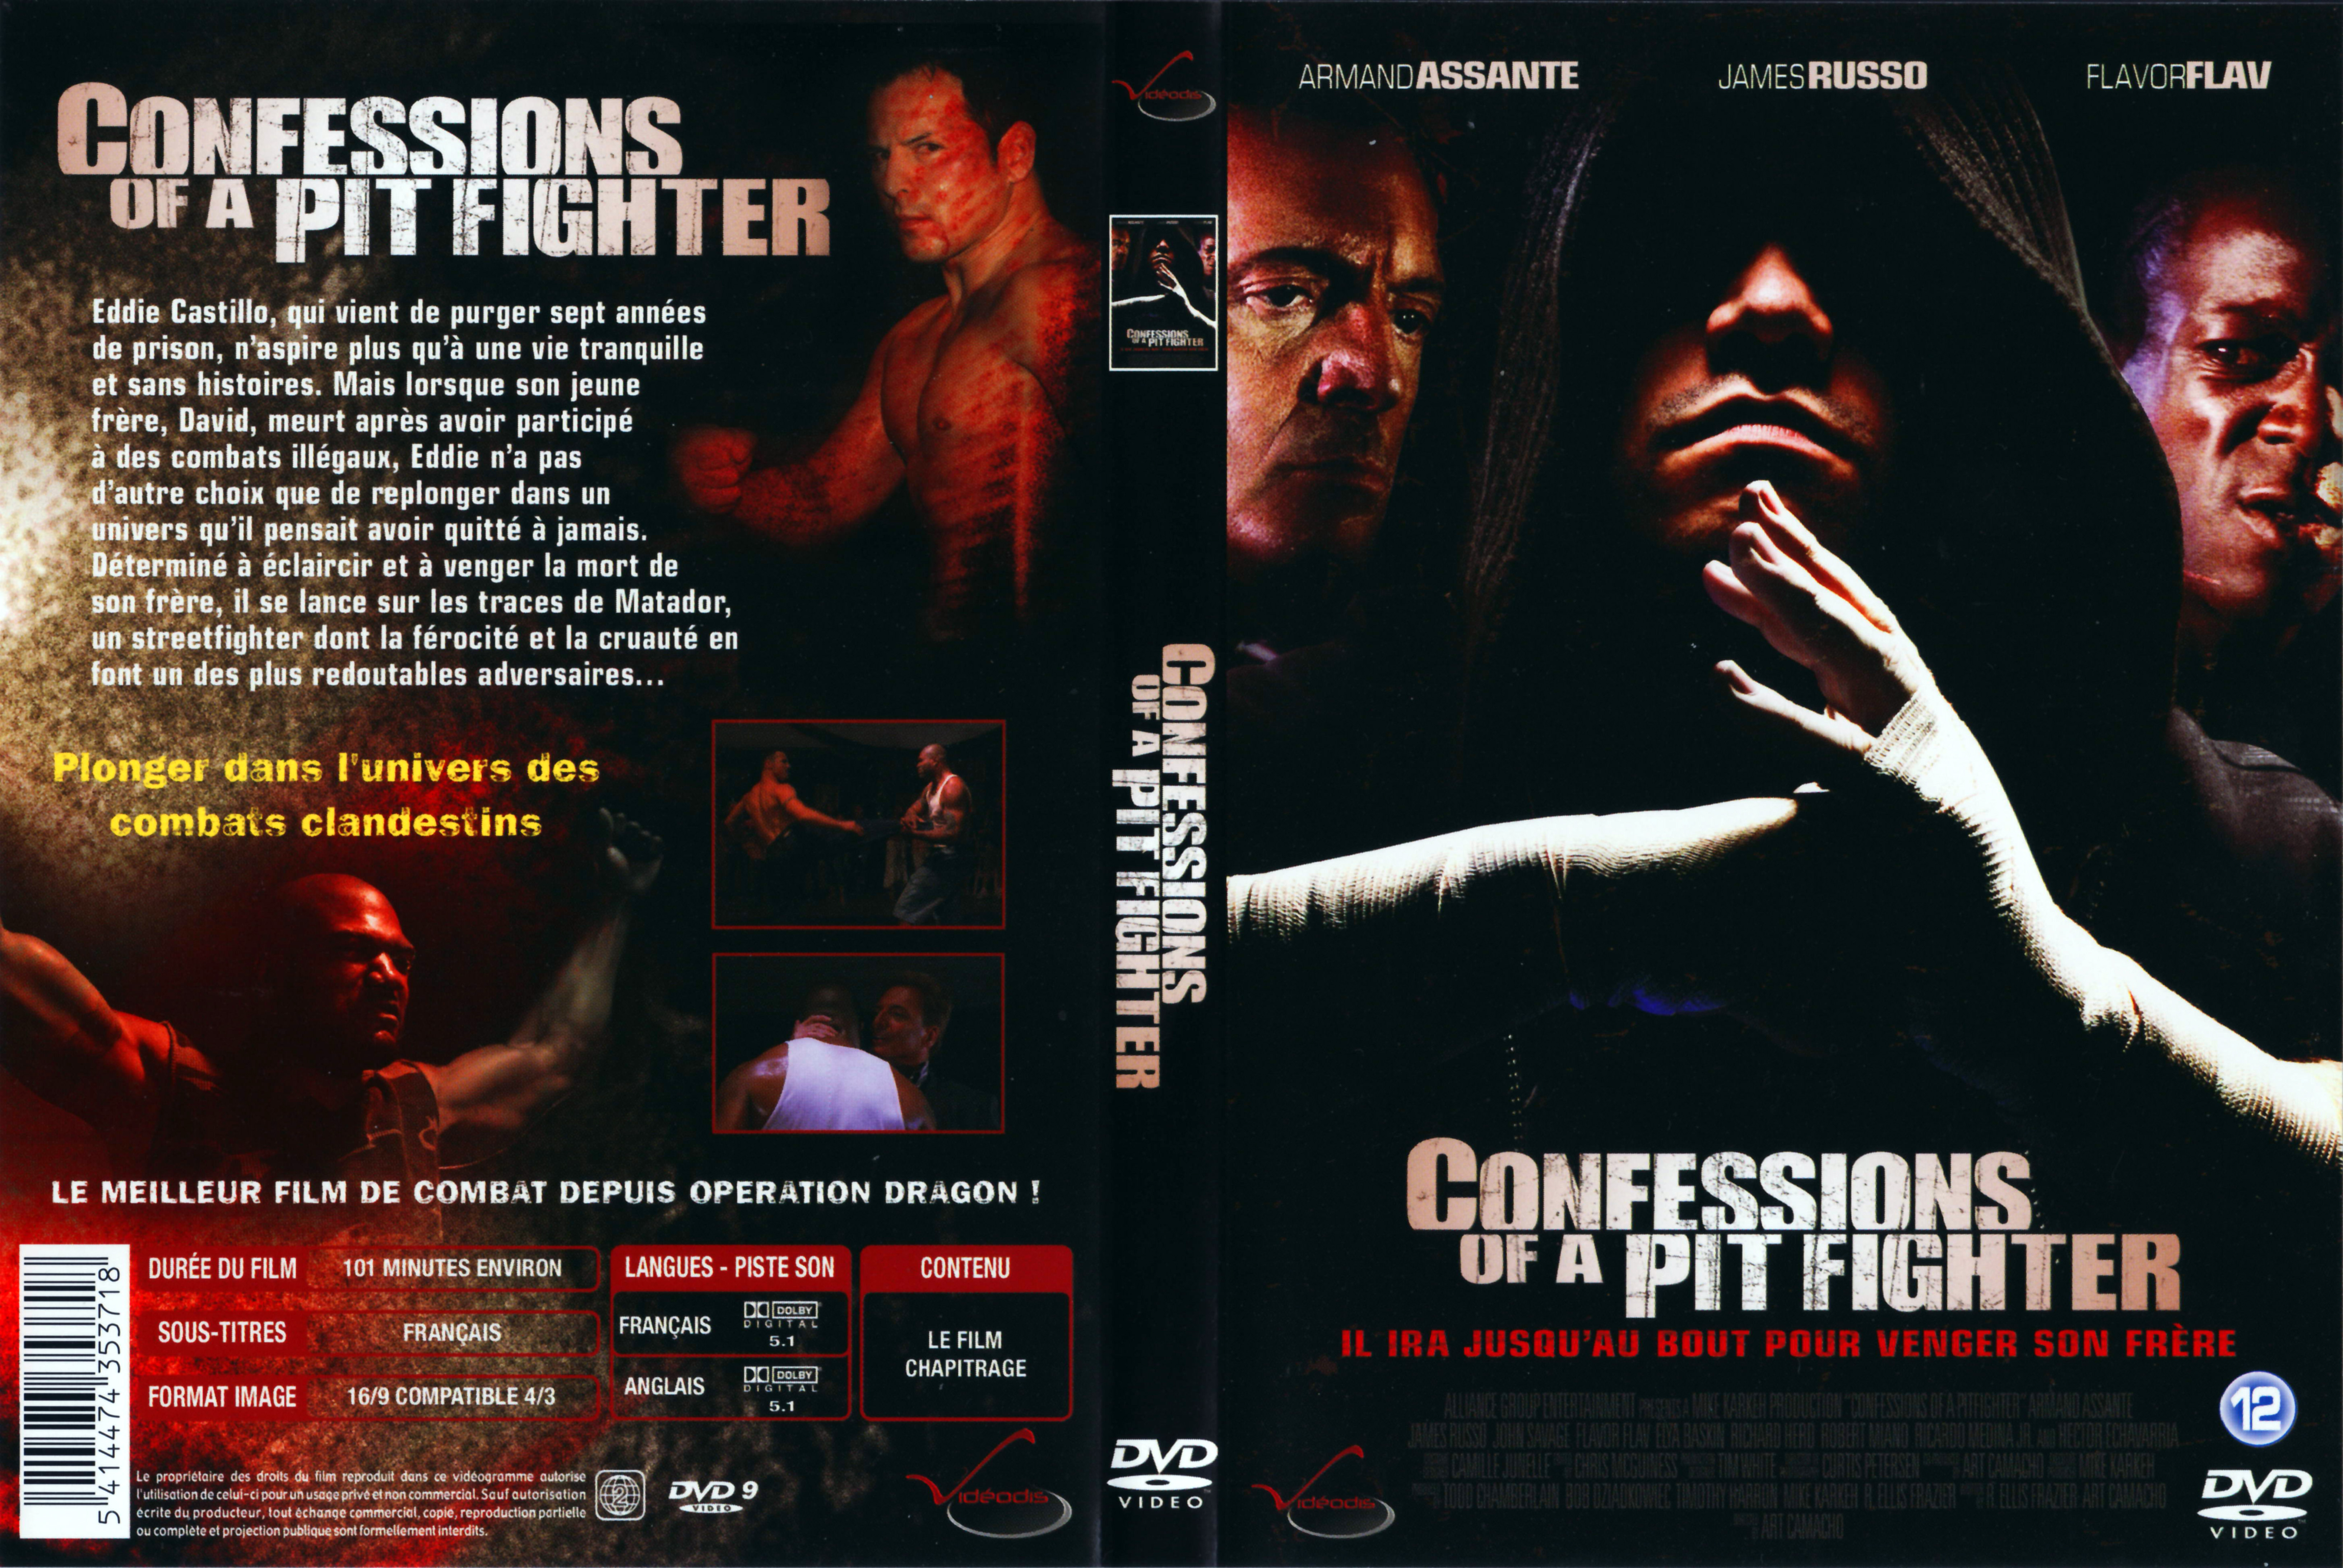 Jaquette DVD Confessions of a pit fighter